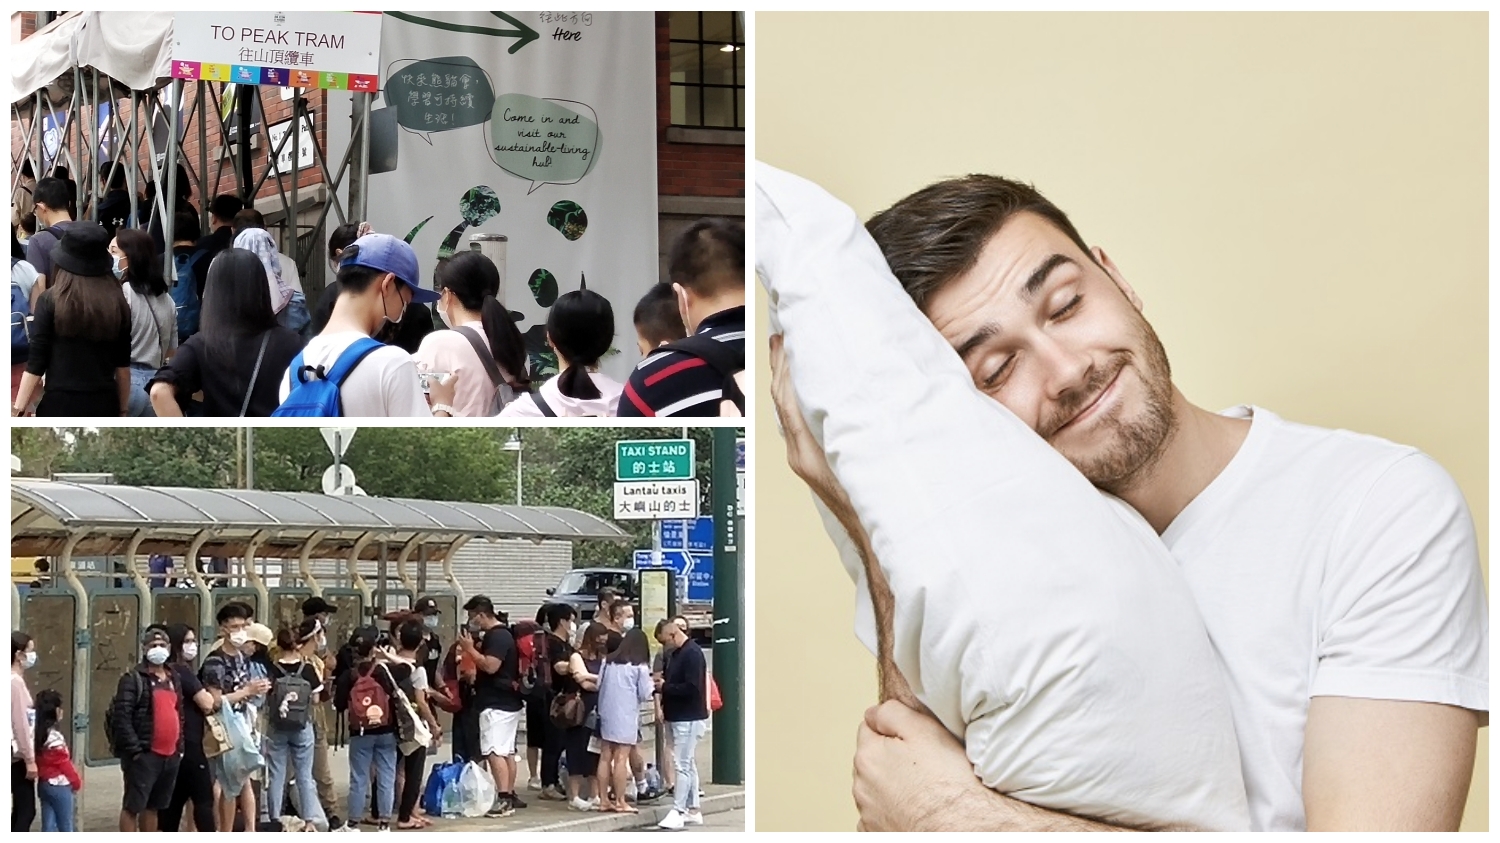 Travelers already in Hong Kong shouldn't indulge to laze in bed